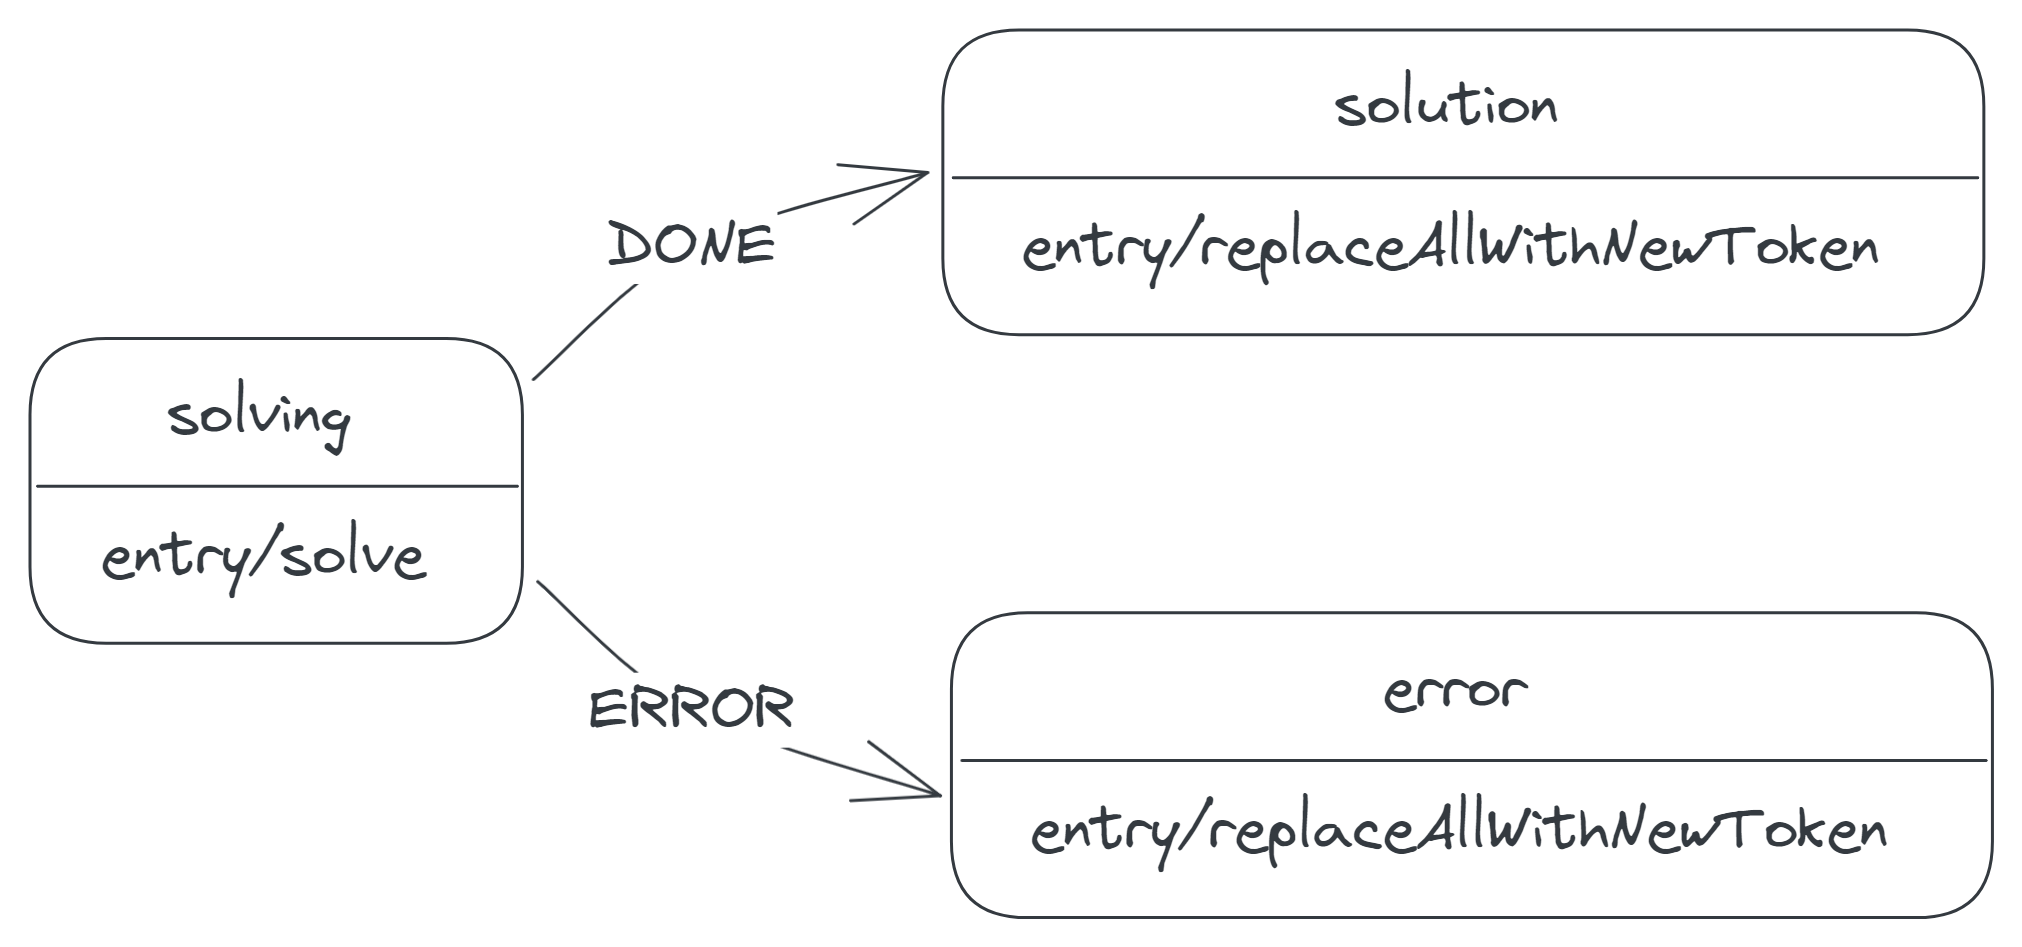 A transition labelled 'DONE', from the solving to the solution state, and another labelled 'ERROR', from the solving to the error state. Both the solution and error states have the extra label 'entry/replaceAllWithNewToken'.